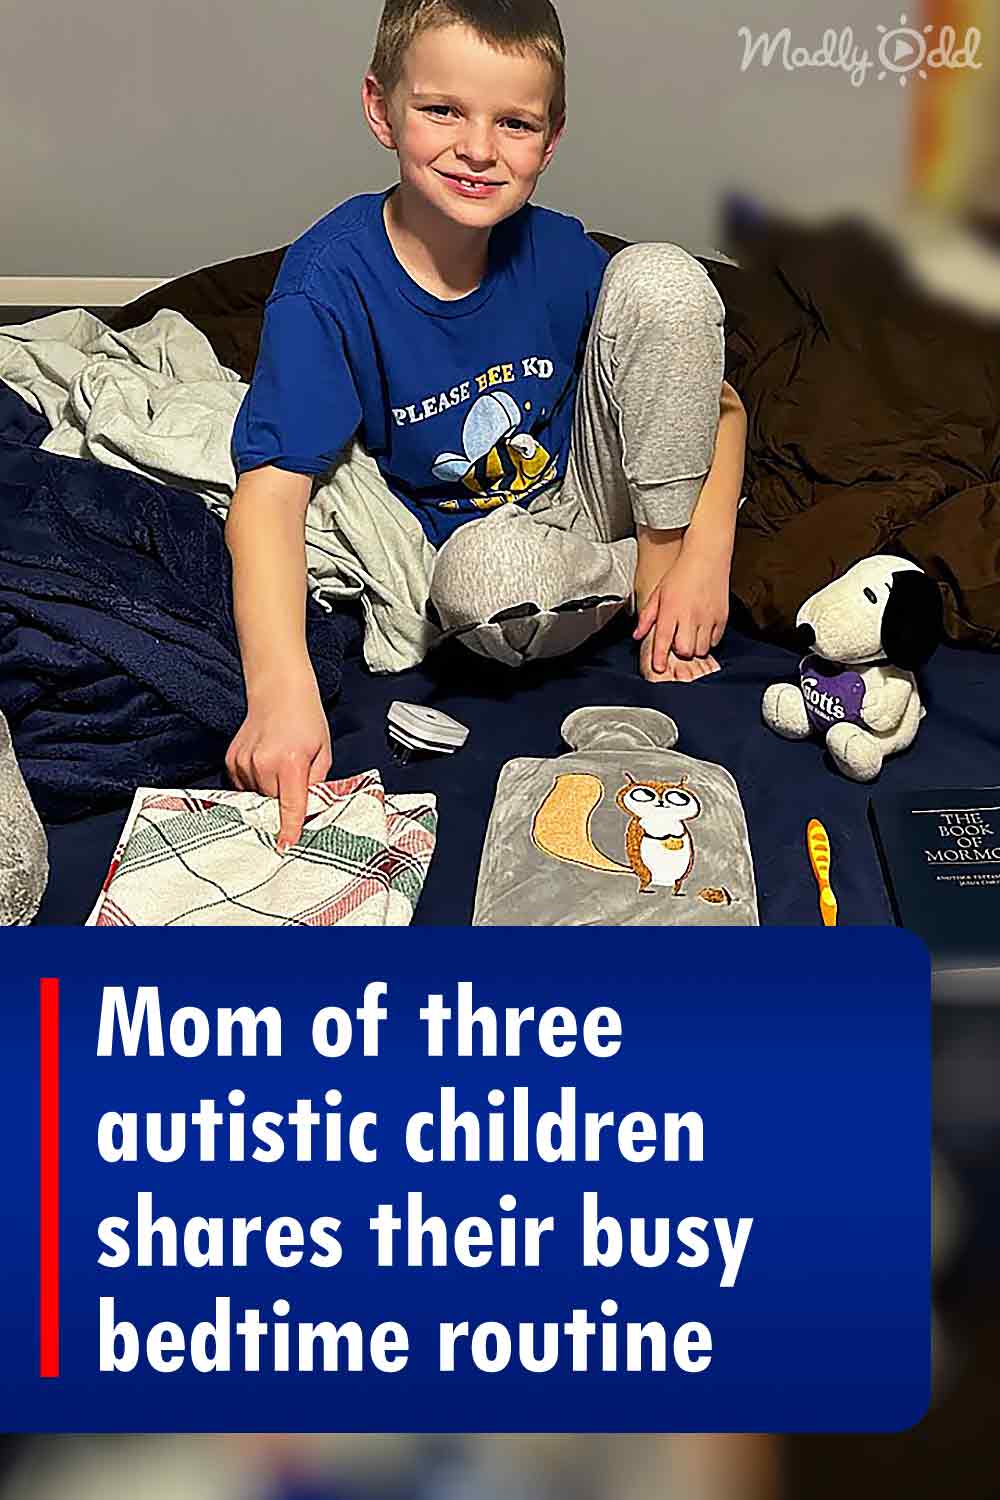 Mom of three autistic children shares their busy bedtime routine